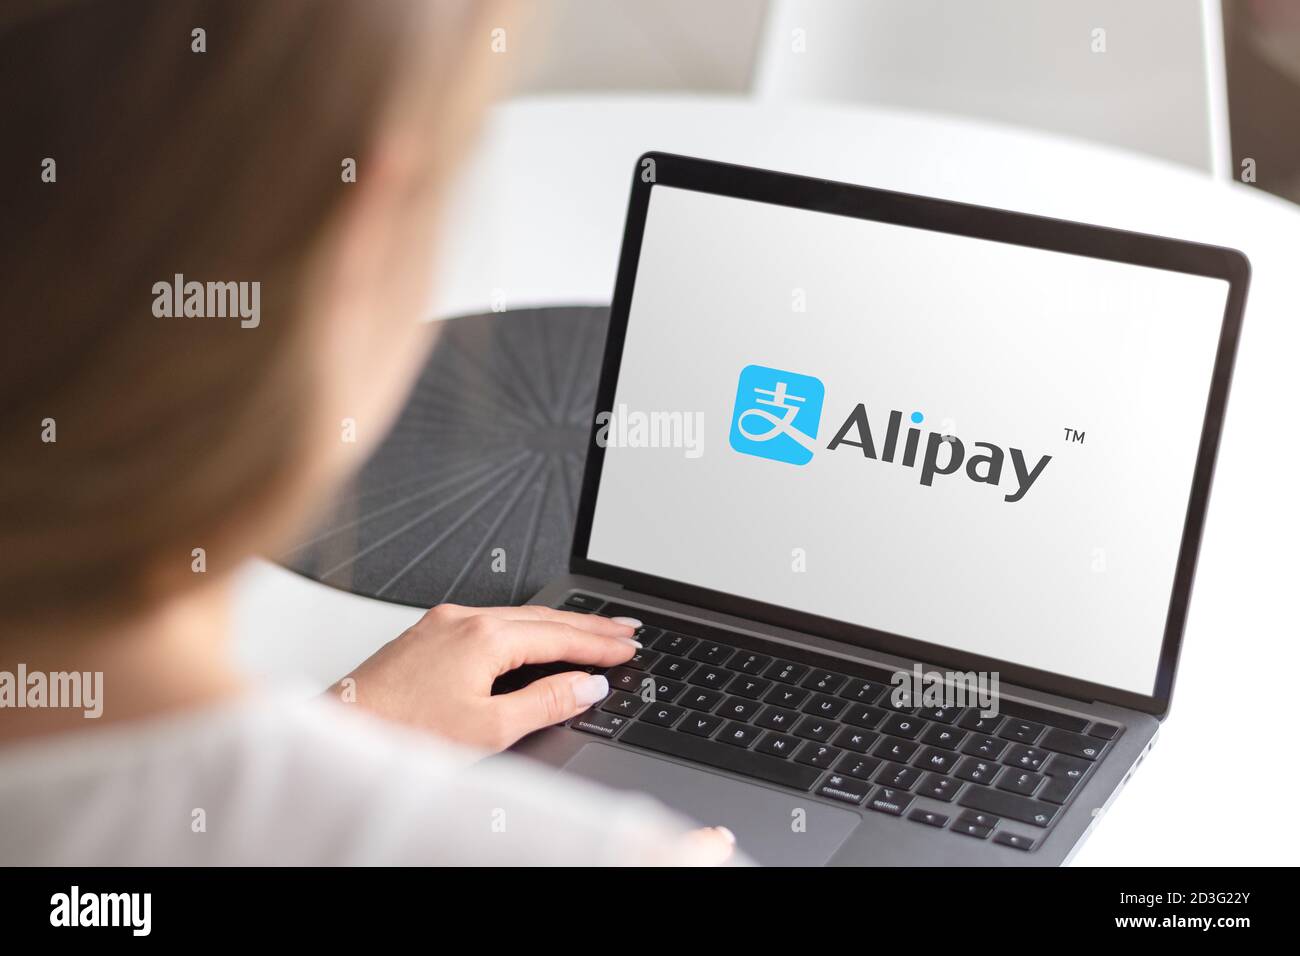 Guilherand-Granges, France - October 08, 2020. Notebook with Alipay logo. Chinese mobile and payment platform. Online money transfers. Stock Photo